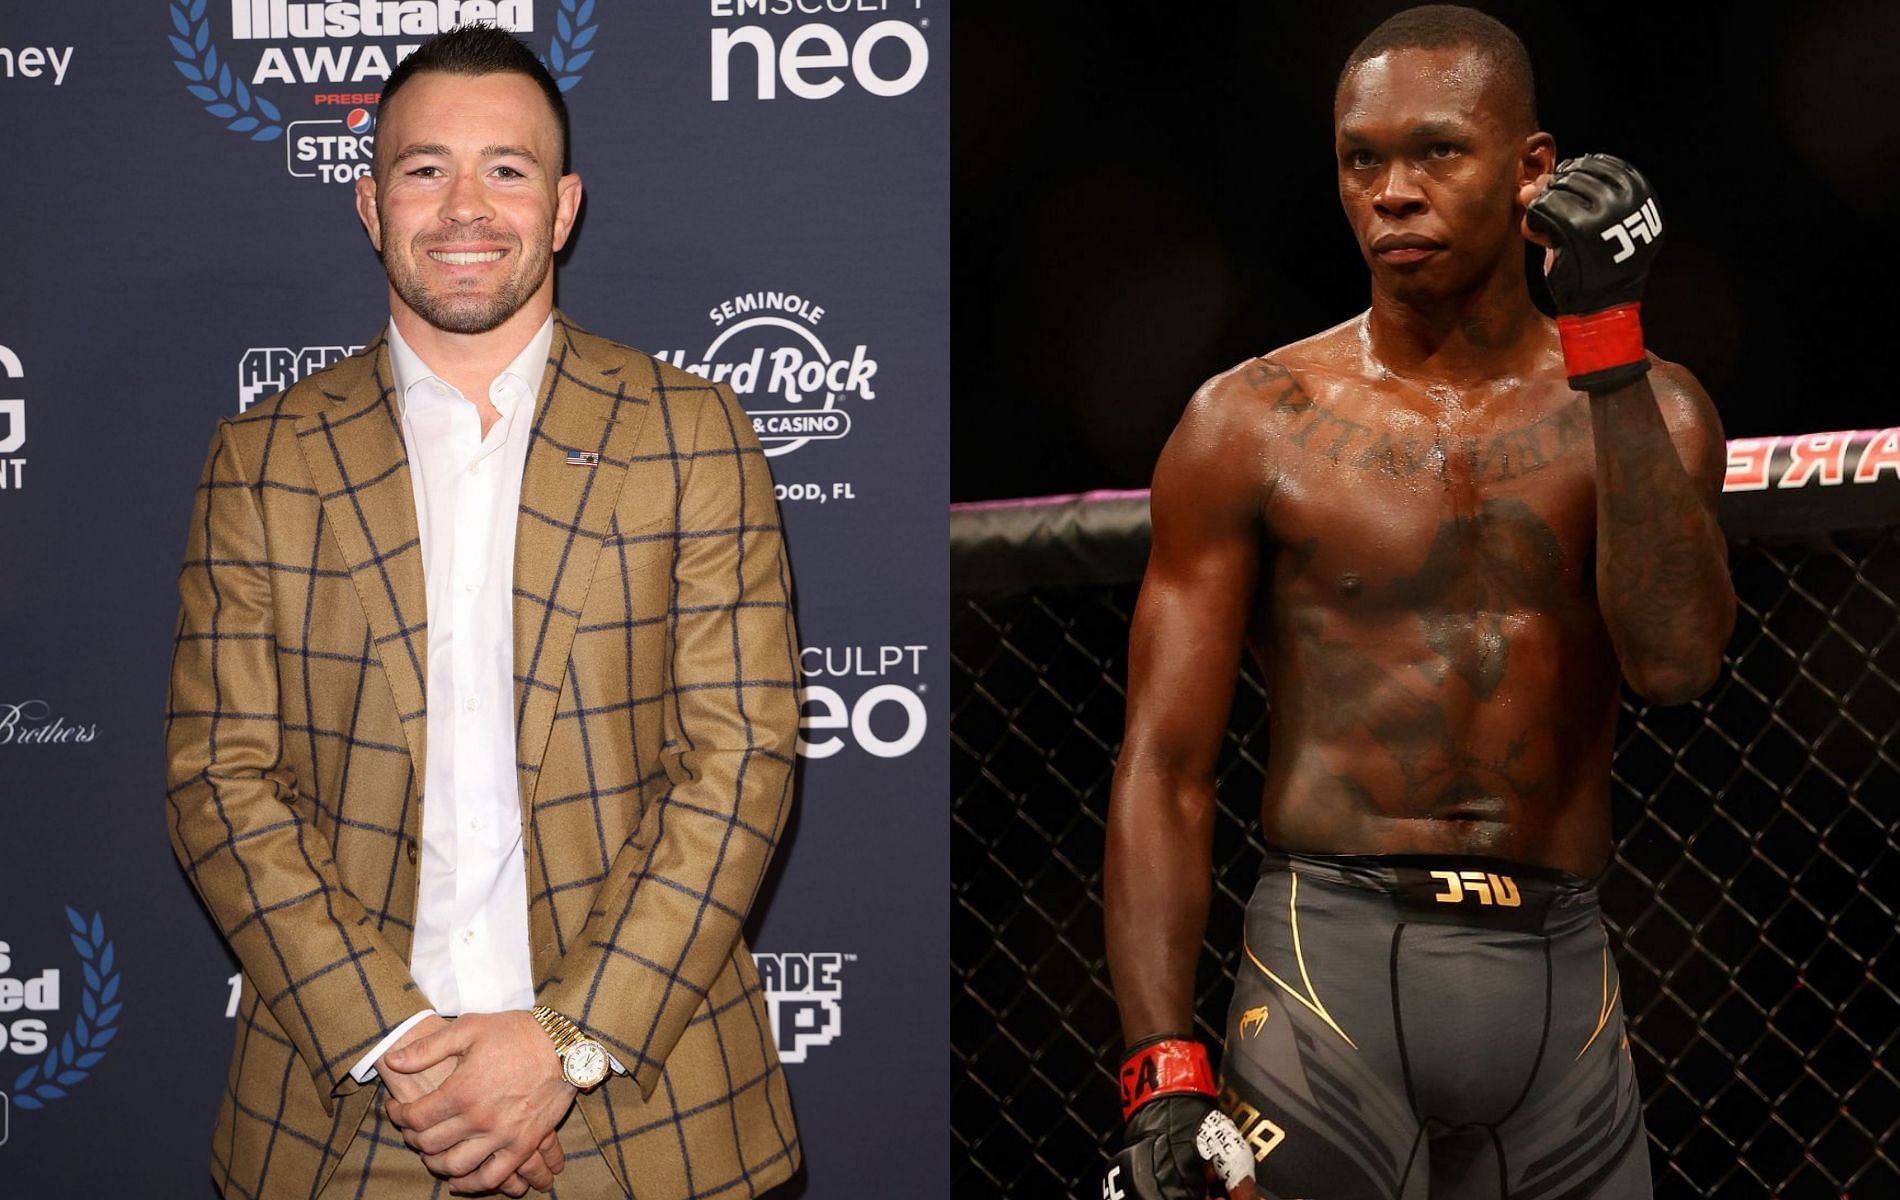 “You can’t just come straight for the champ – who the f*** are you?” – Israel Adesanya on Colby Covington aiming for a middleweight title shot